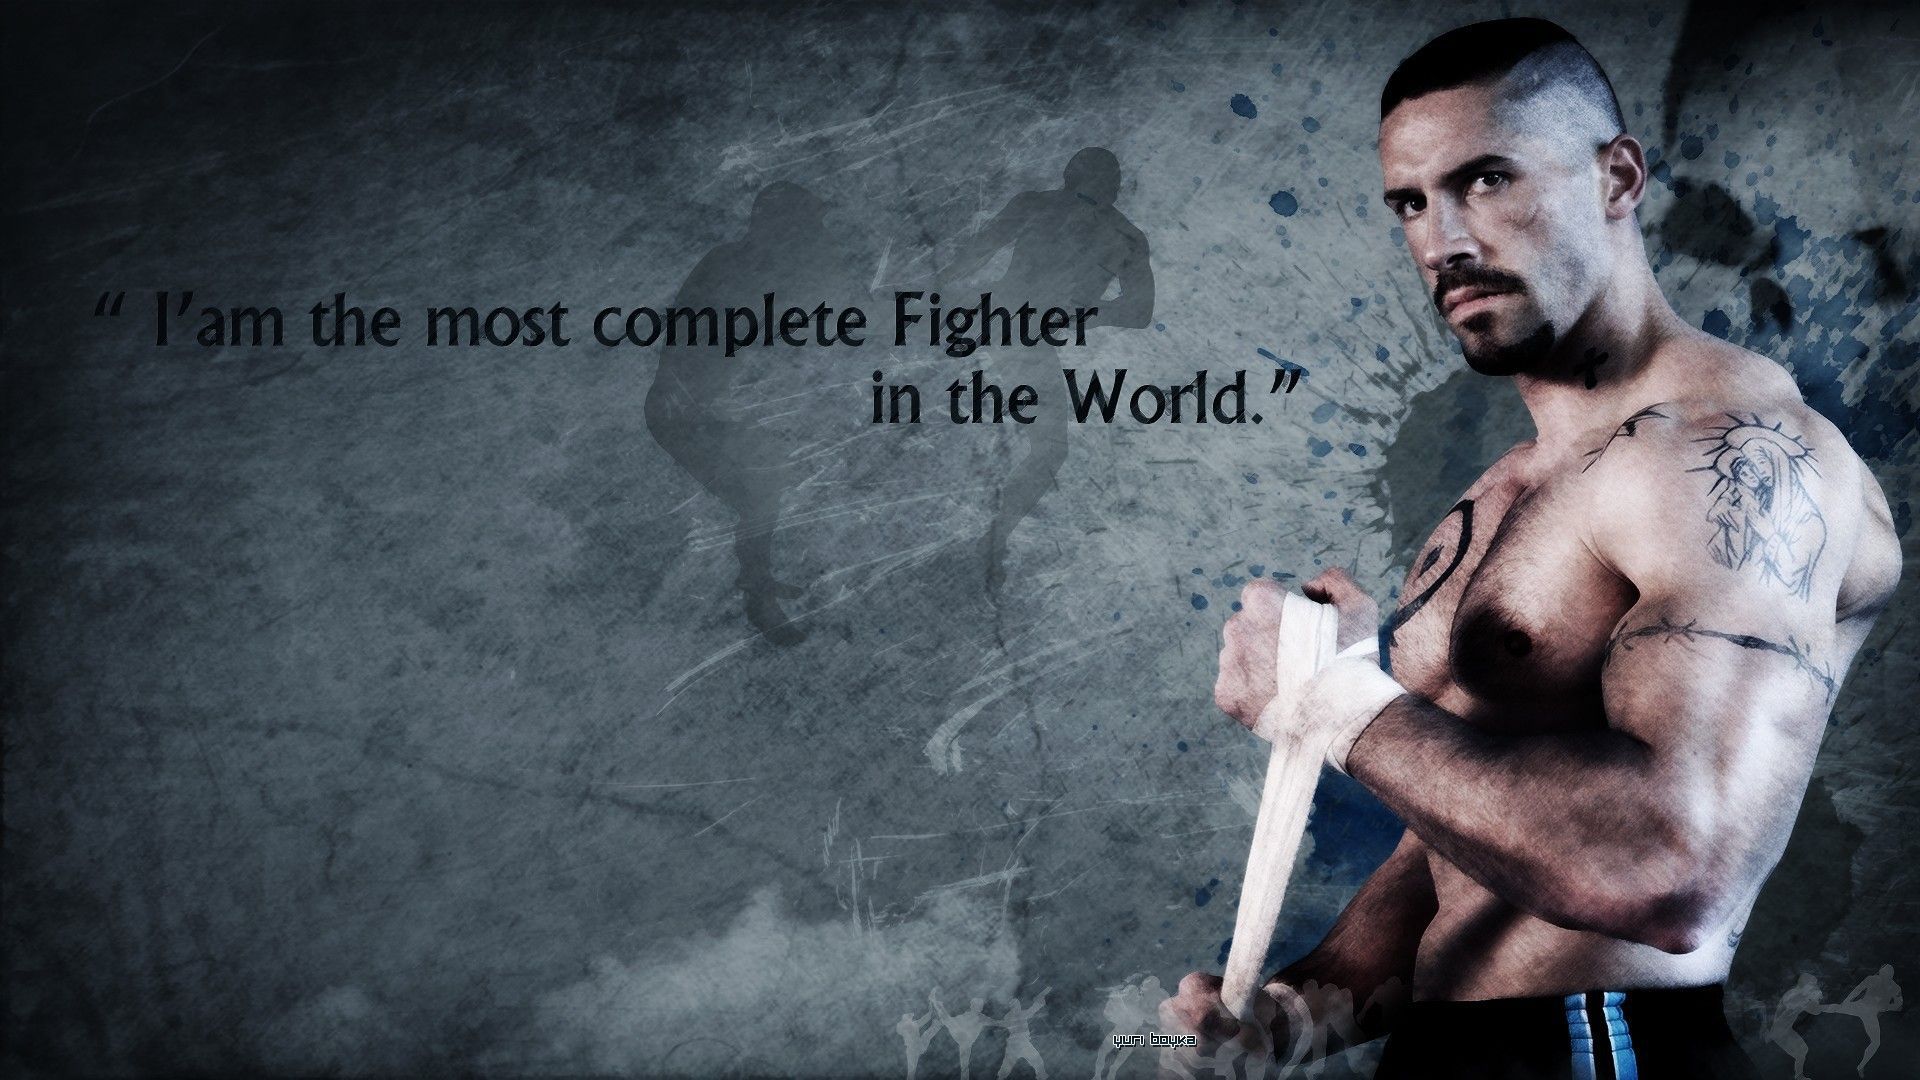 Scott Adkins as Boyka wallpapers and images - wallpapers, pictures ...